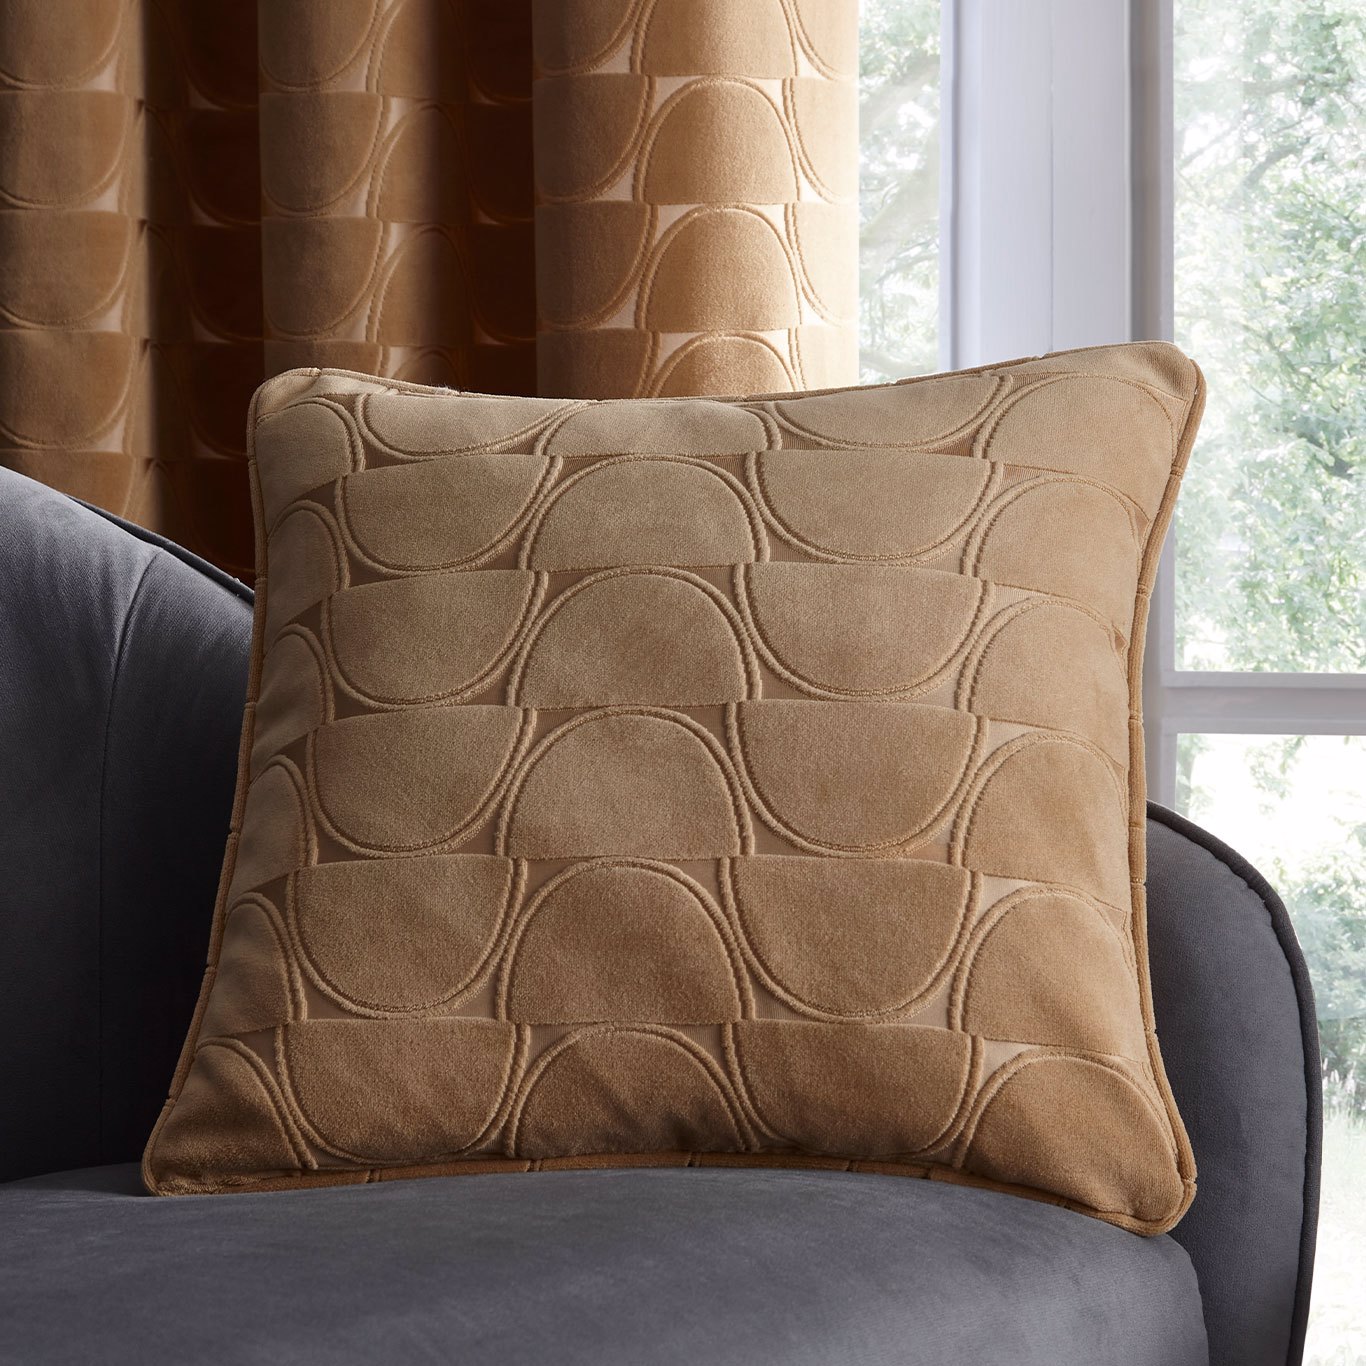 Lucca Ochre Cushions by STG